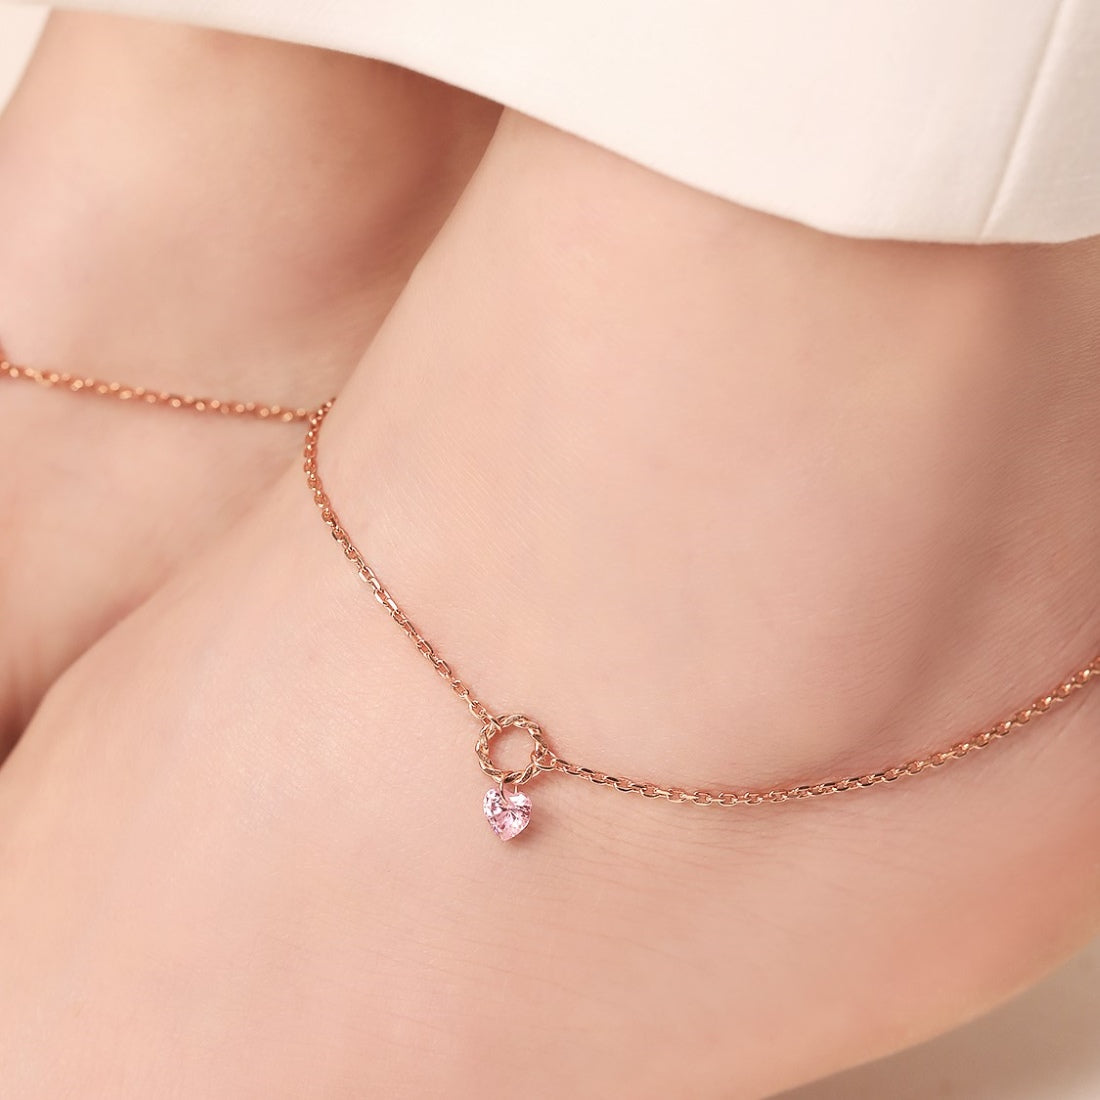 Roseate Charm 925 Sterling Silver Chain Anklet with Cubic Zirconia